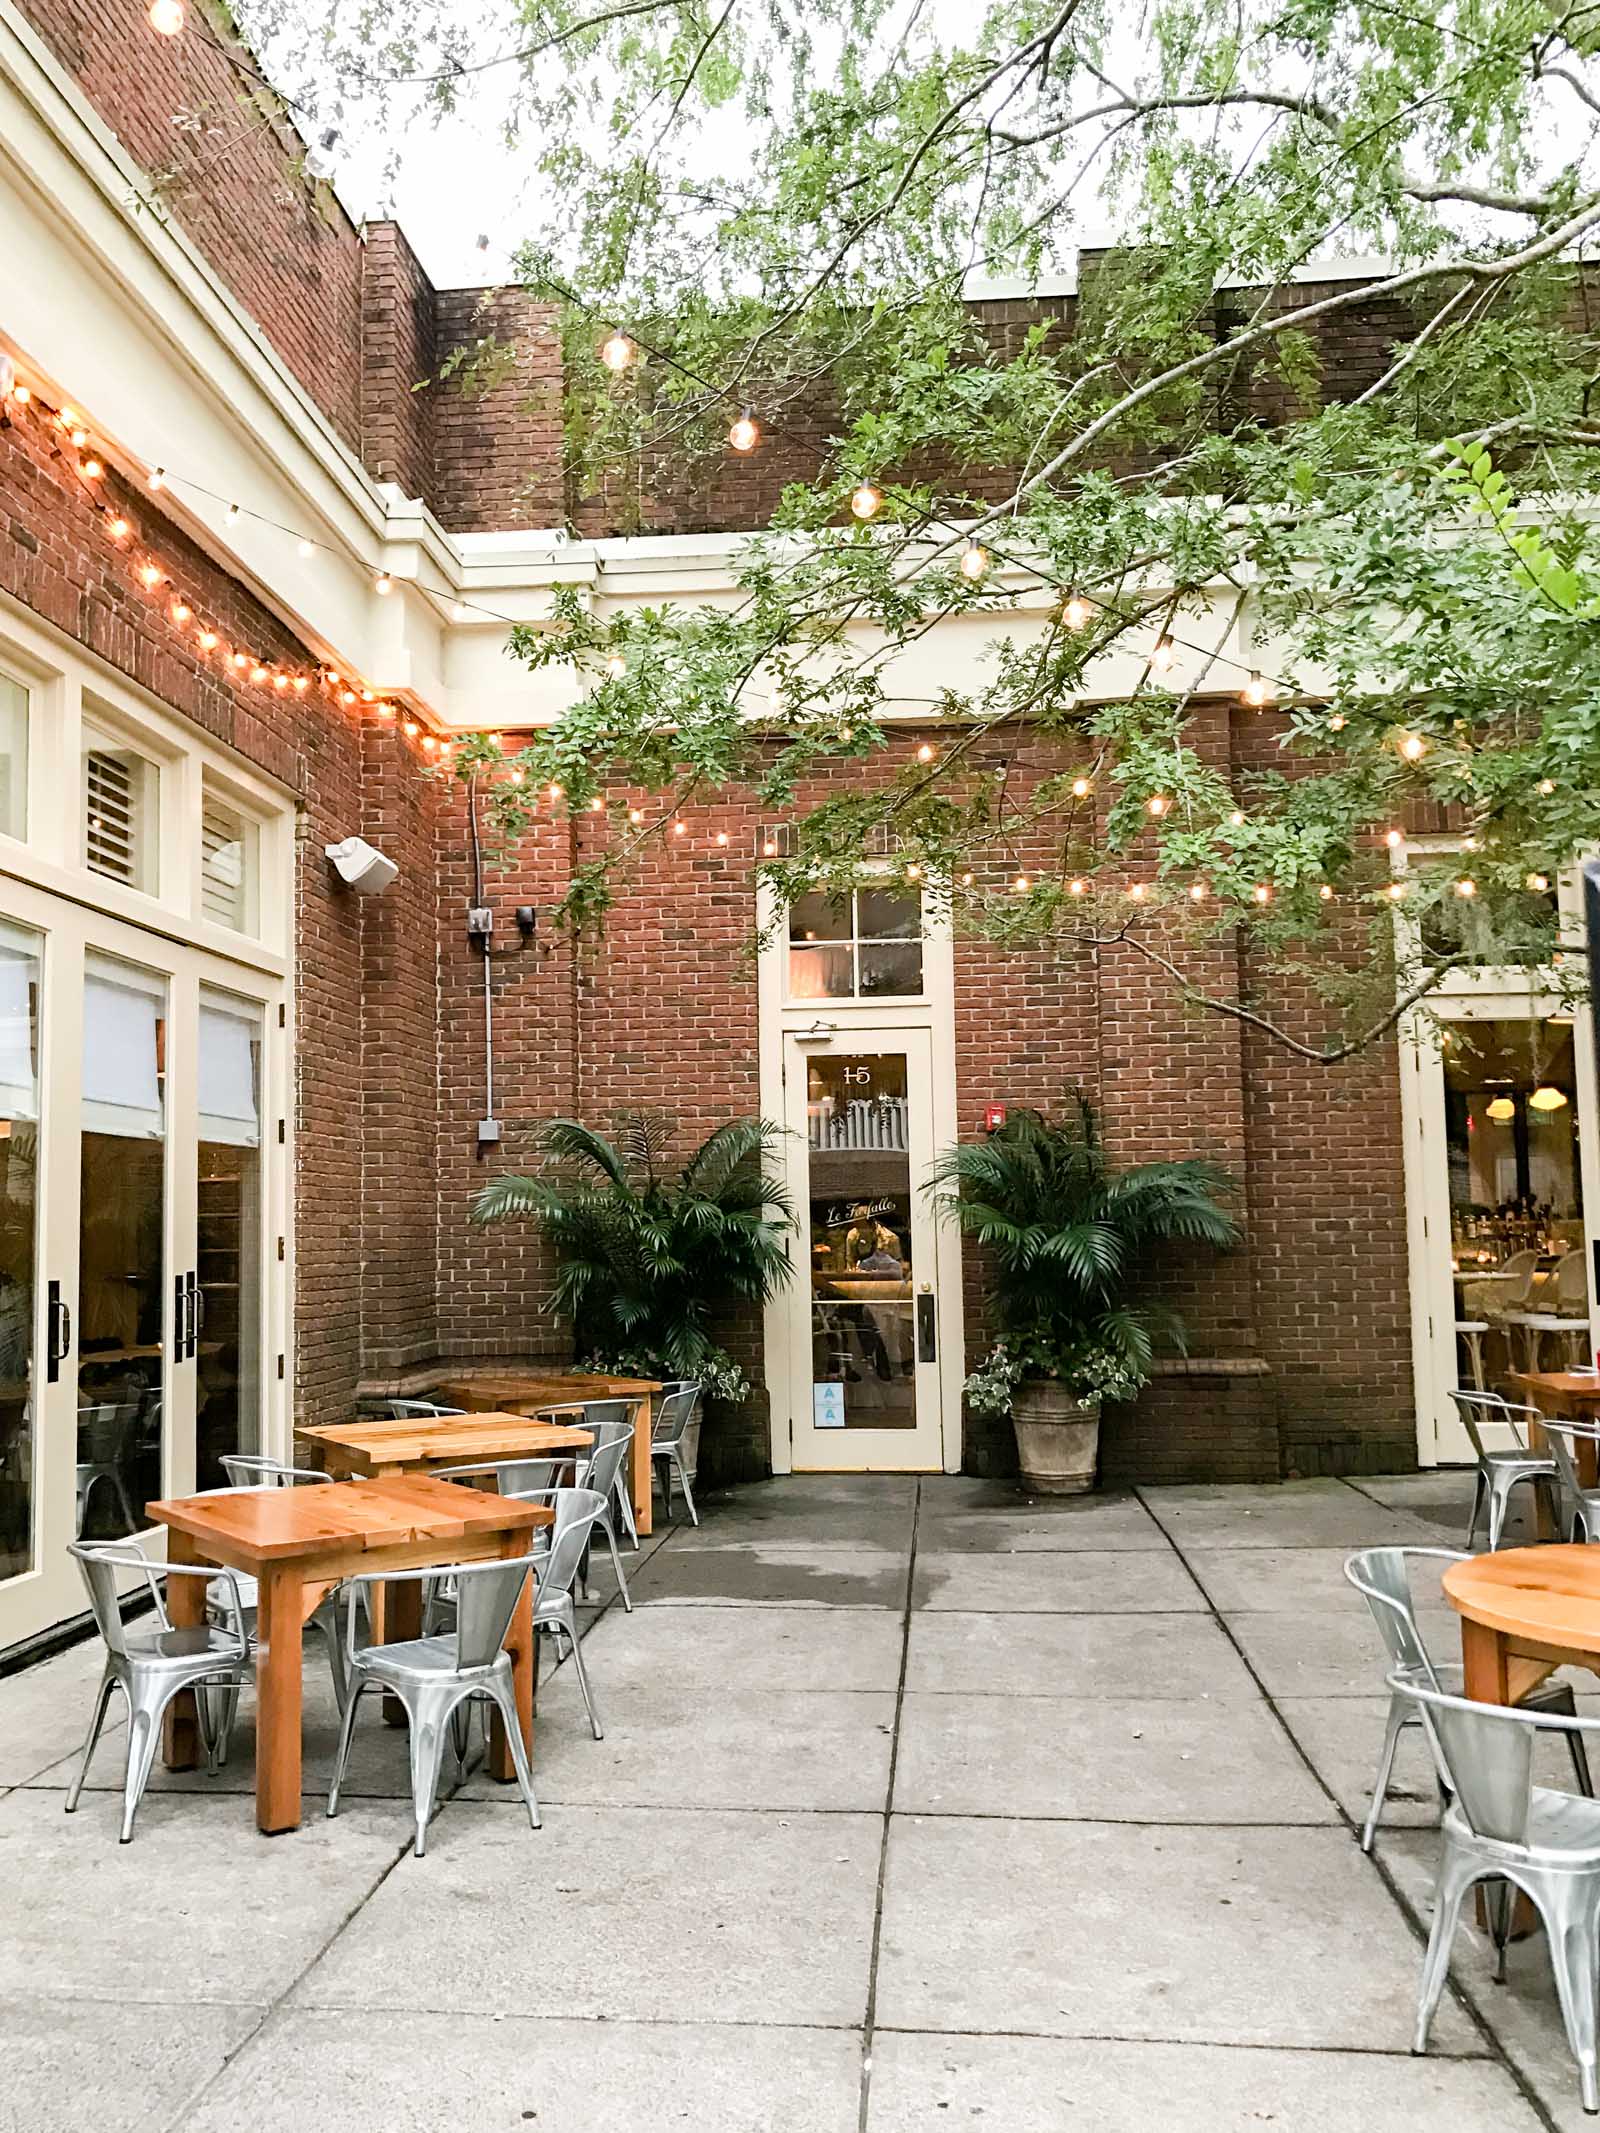 best Italian restaurant in Charleston | le farfalle | where to eat in Charleston | every day joie by elle bowesbest Italian restaurant in Charleston | le farfalle | where to eat in Charleston | every day joie by elle bowes